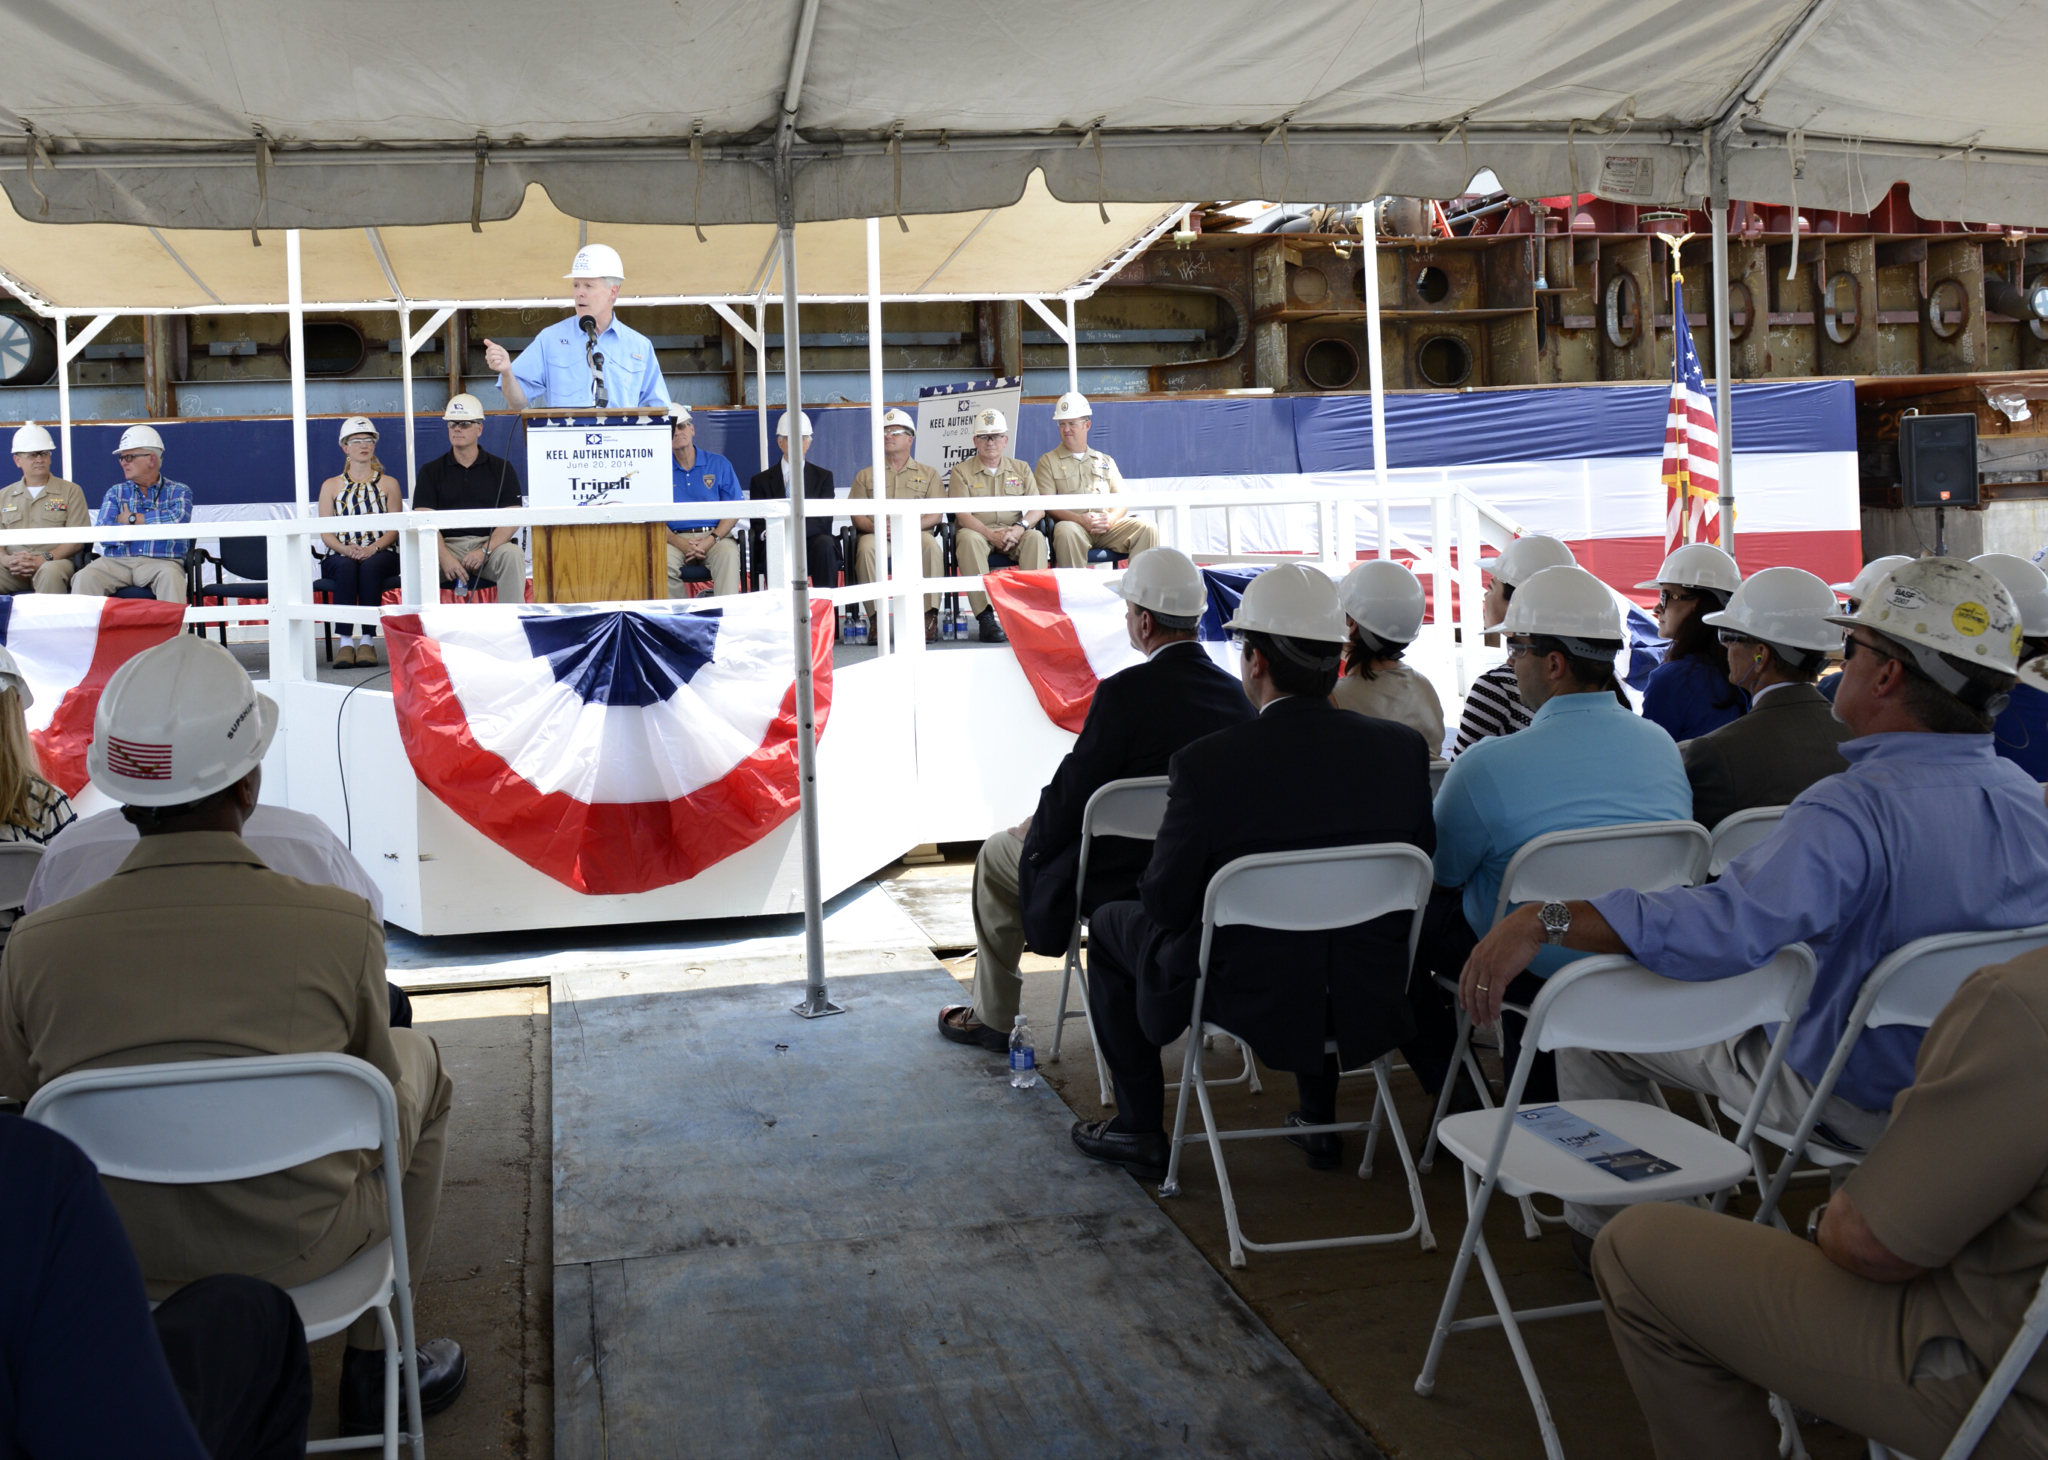 Secretary of the Navy (SECNAV) Ray Mabus delivers remarks during the keel-laying ceremony for the amphibious assault ship Tripoli (LHA-7). US Navy Photo